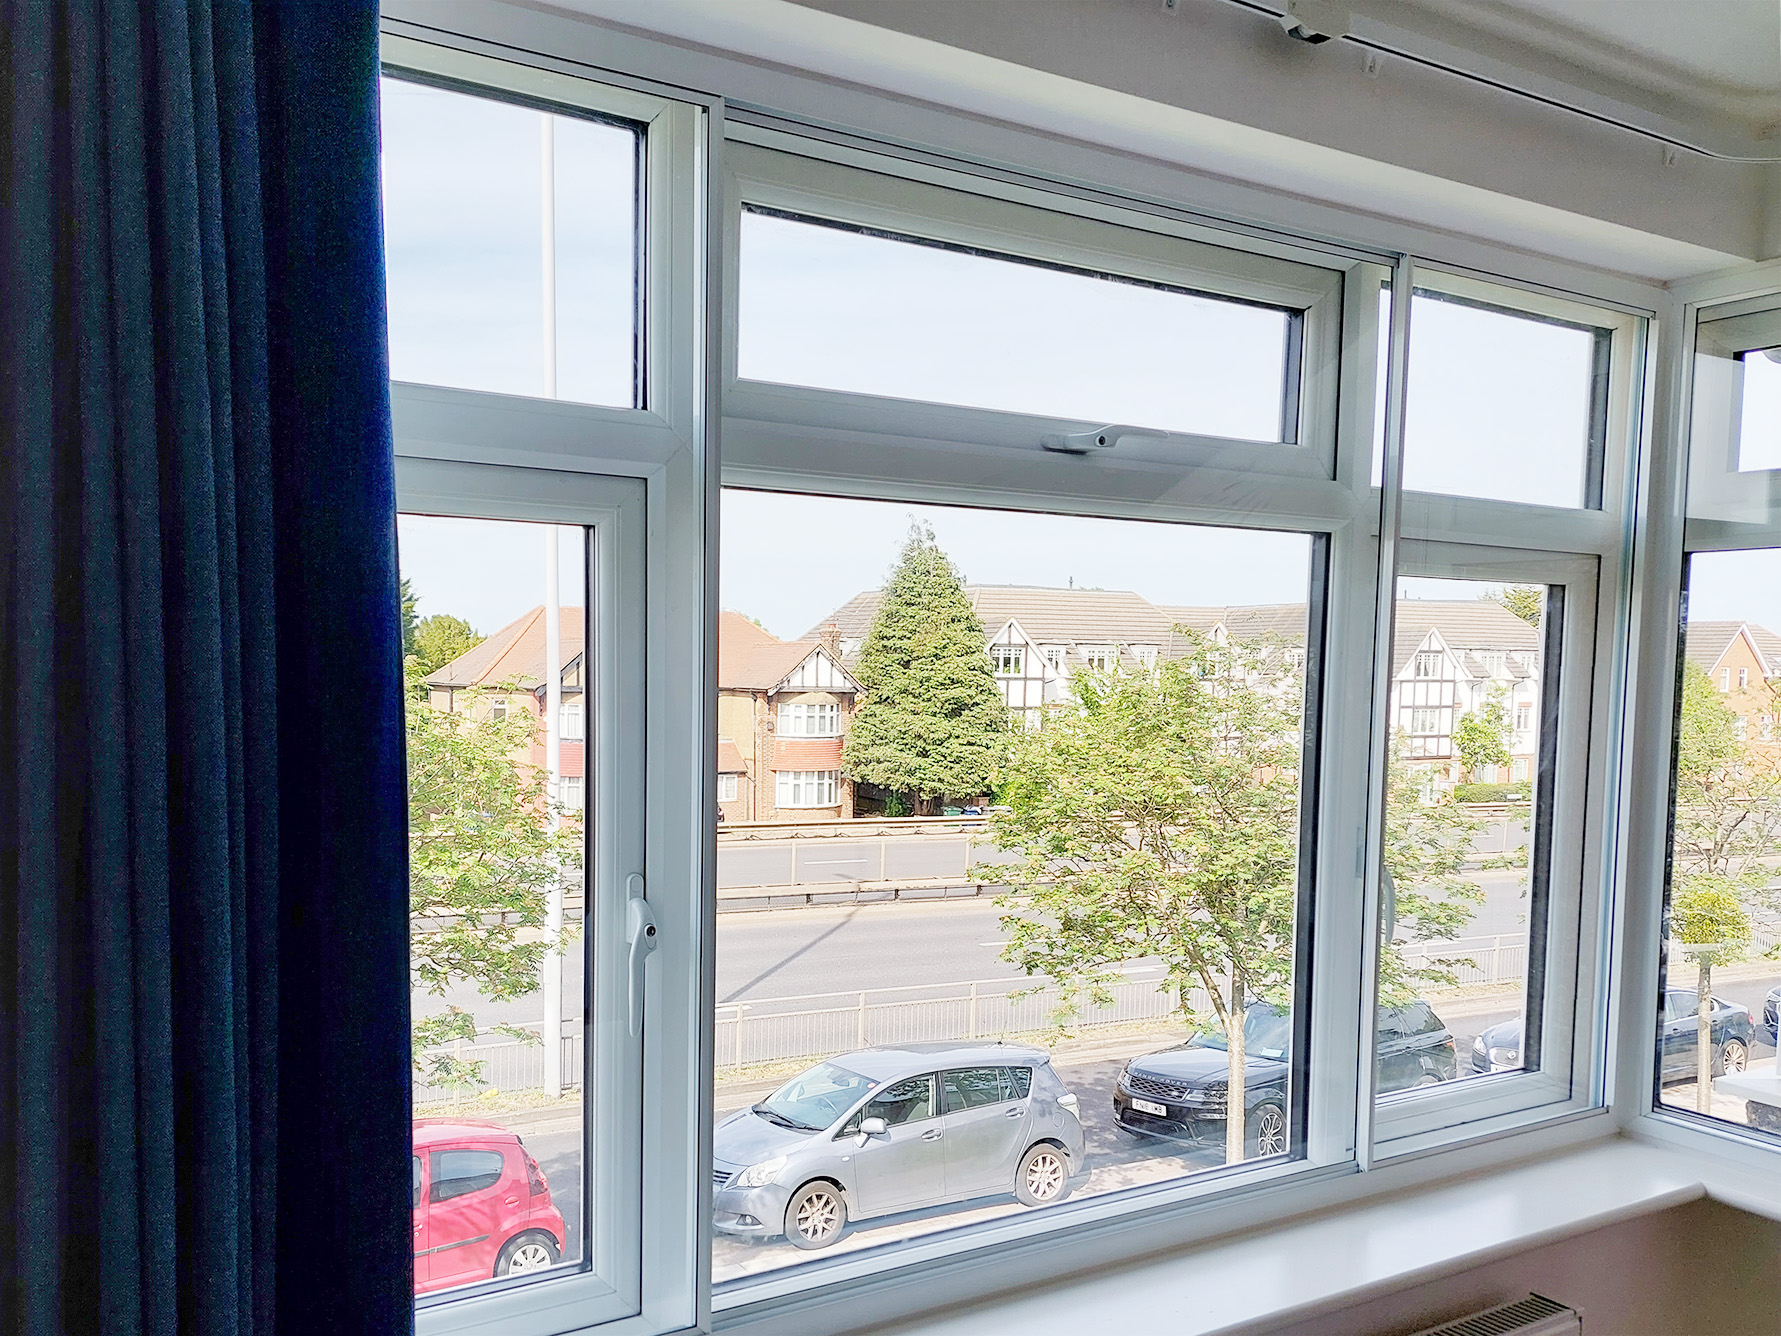 secondary glazing window-looking out dual carriage way